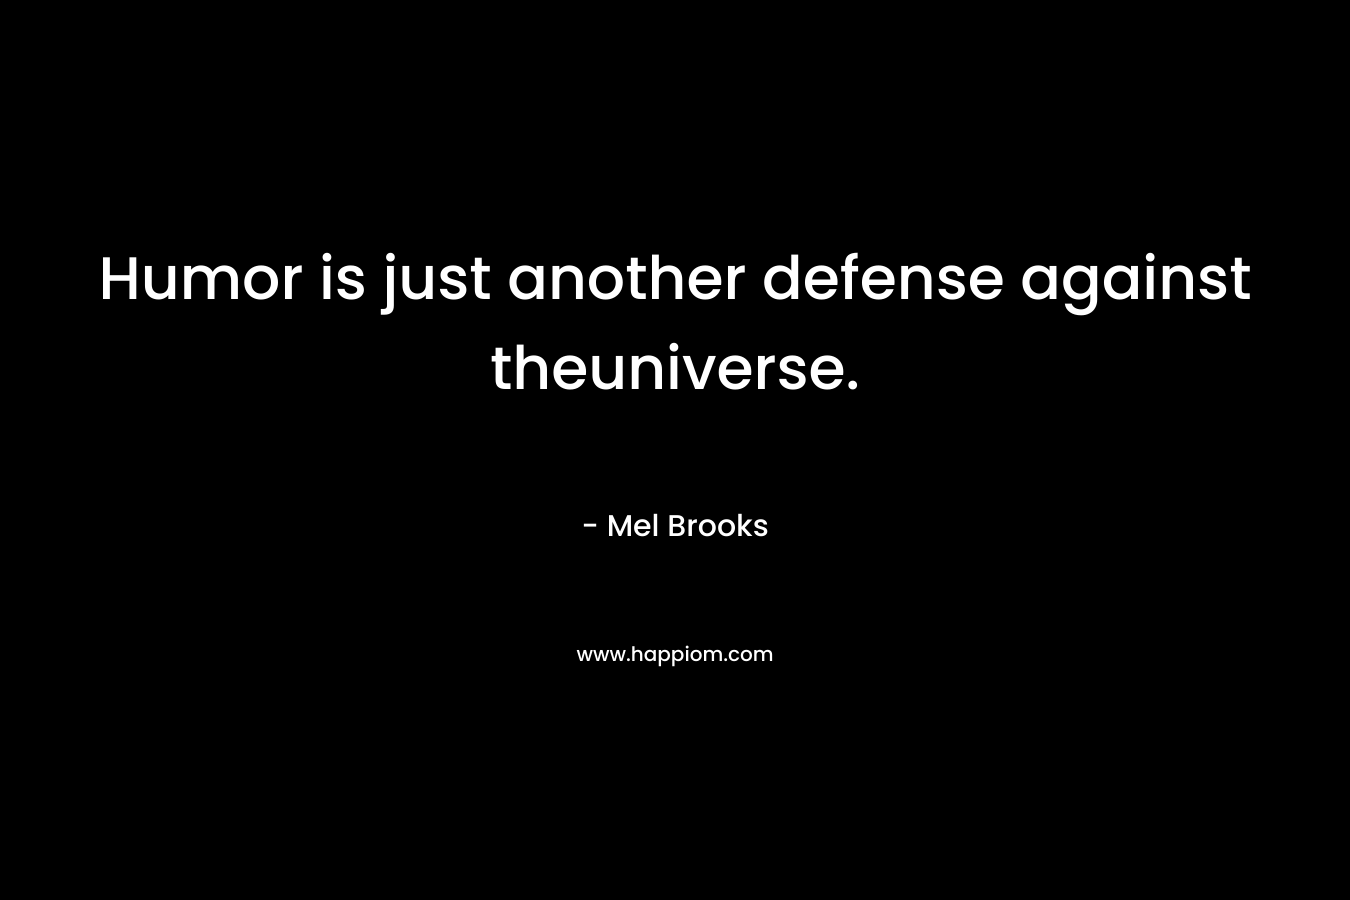 Humor is just another defense against theuniverse. – Mel Brooks